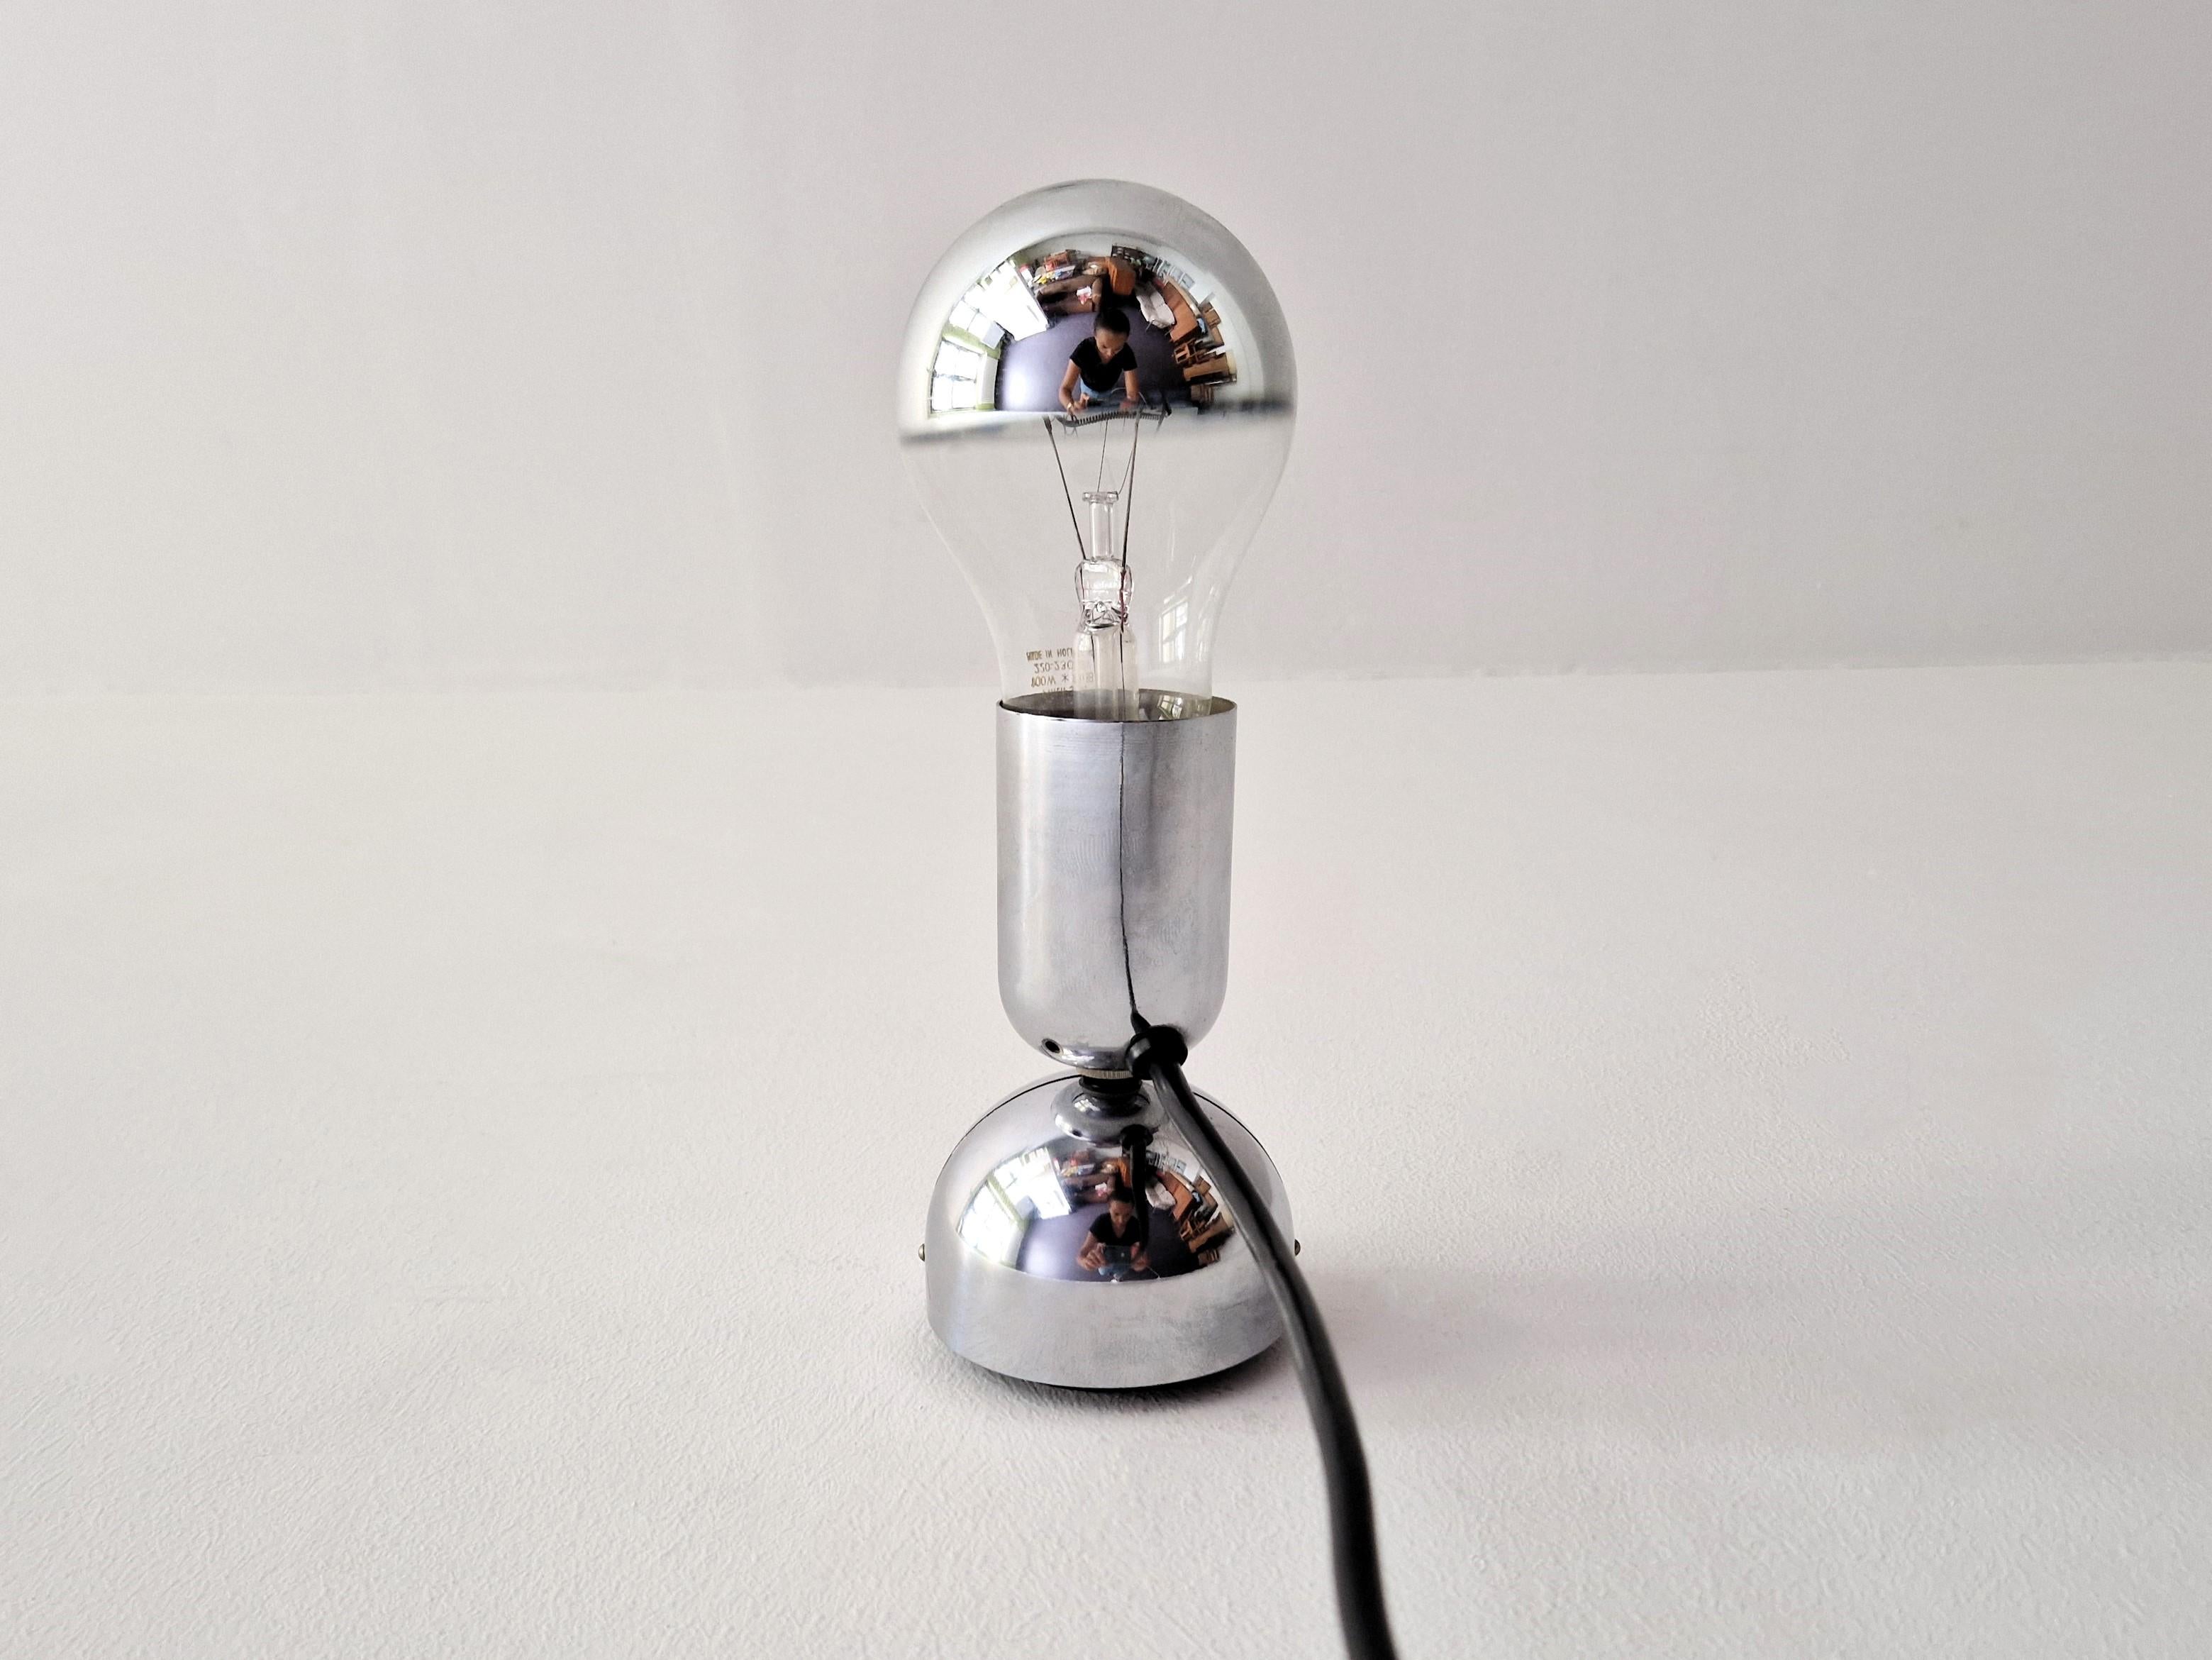 Mid-20th Century Pollux table or wall lamp by Ingo Maurer for Design M, Germany 1960's